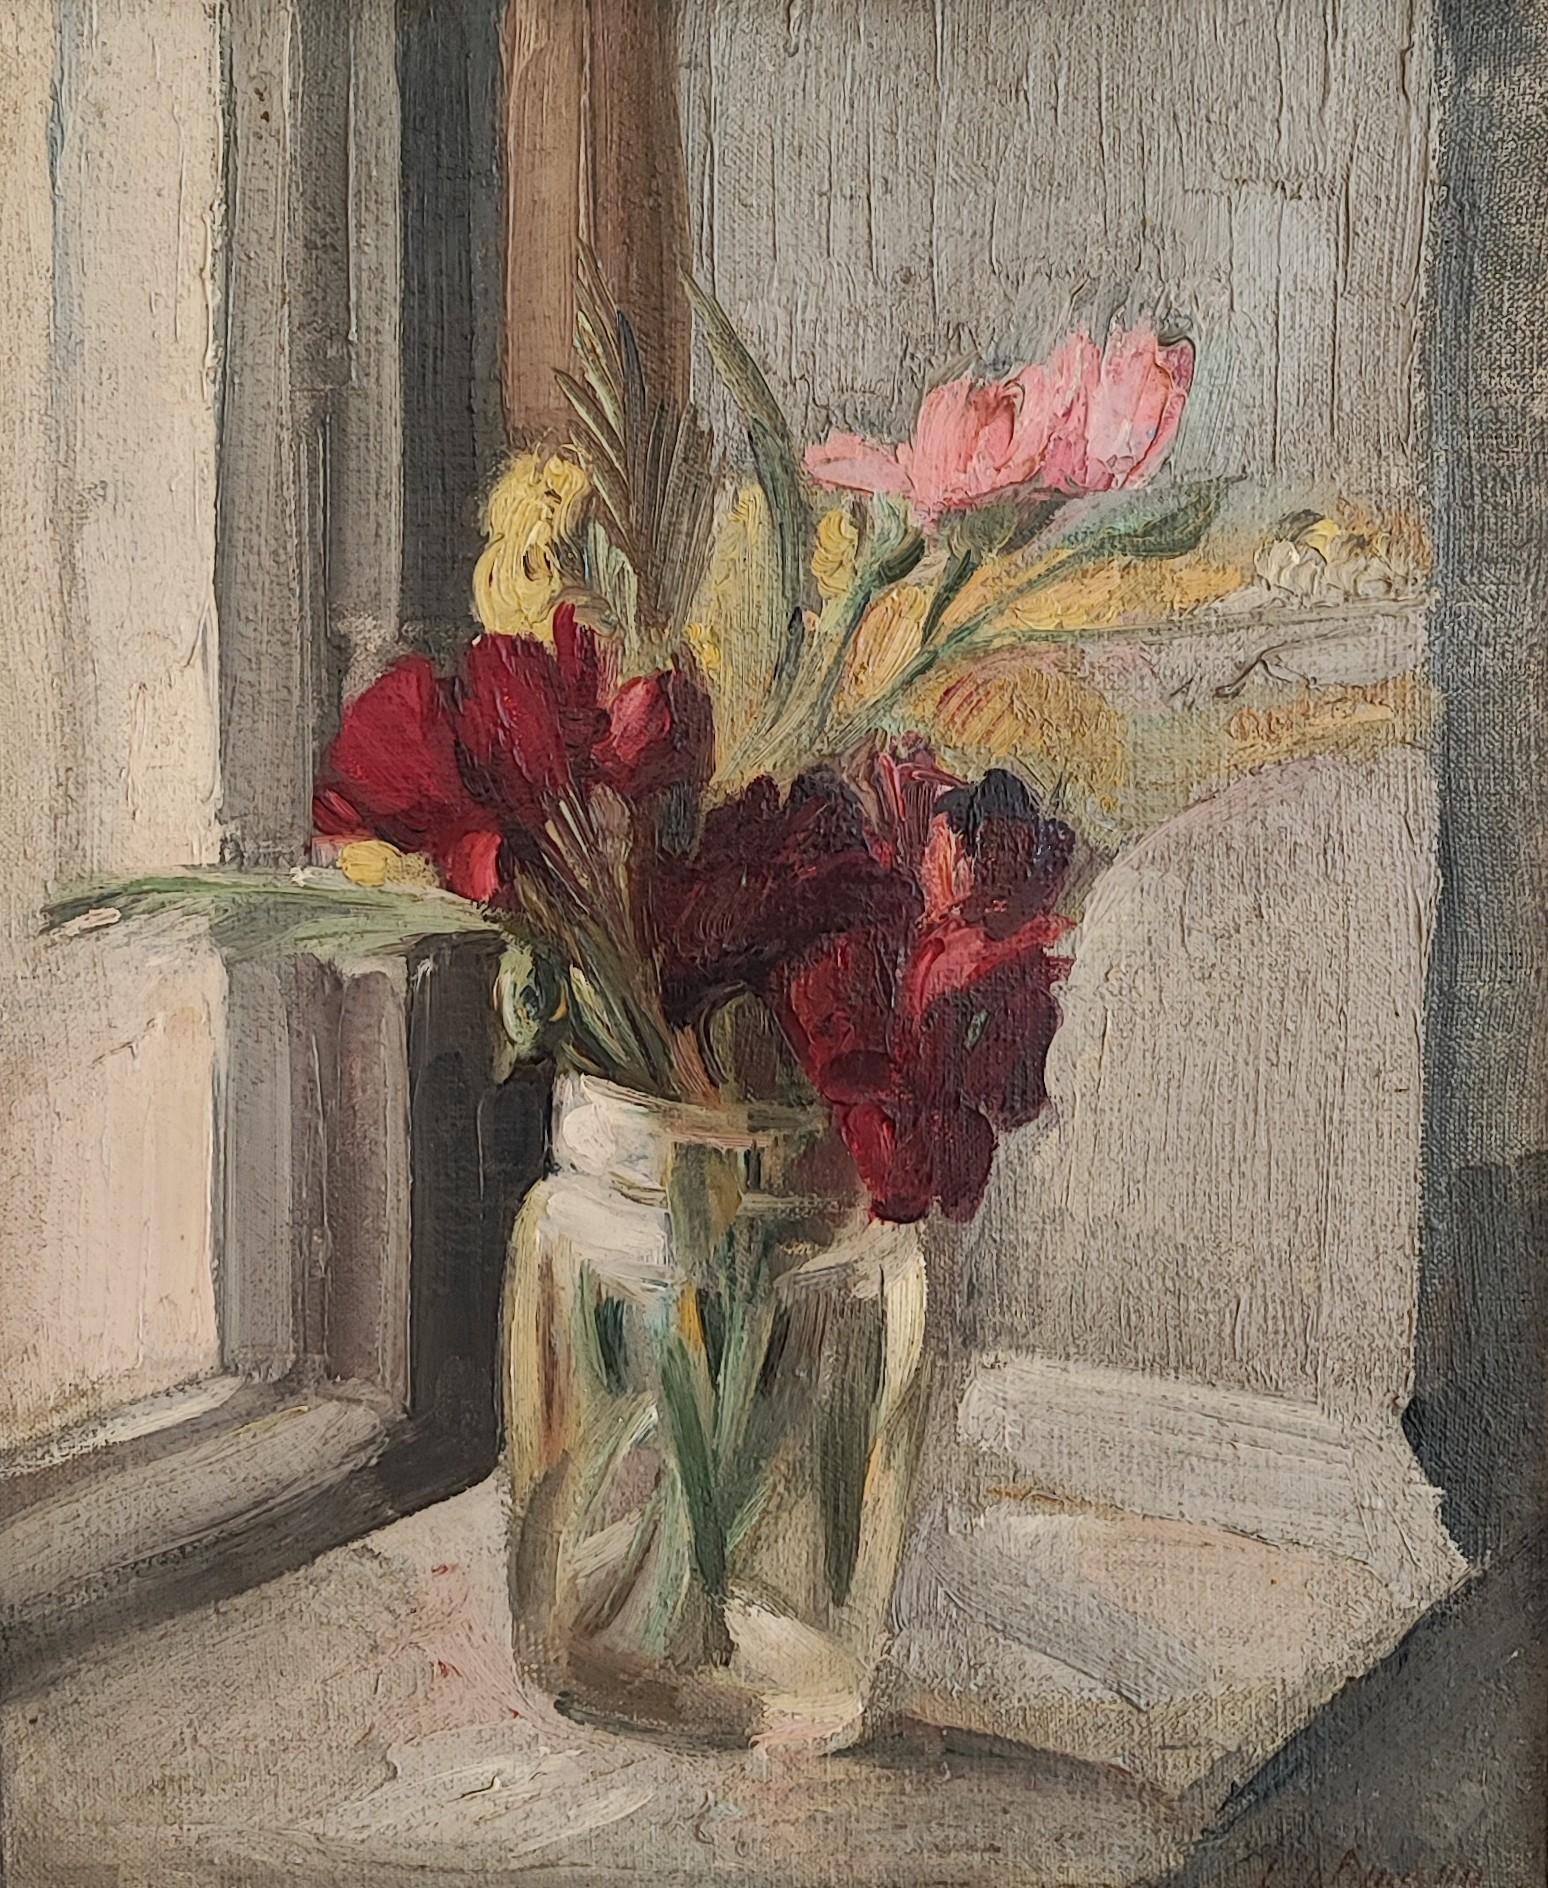 Bouquet of flowers by the window